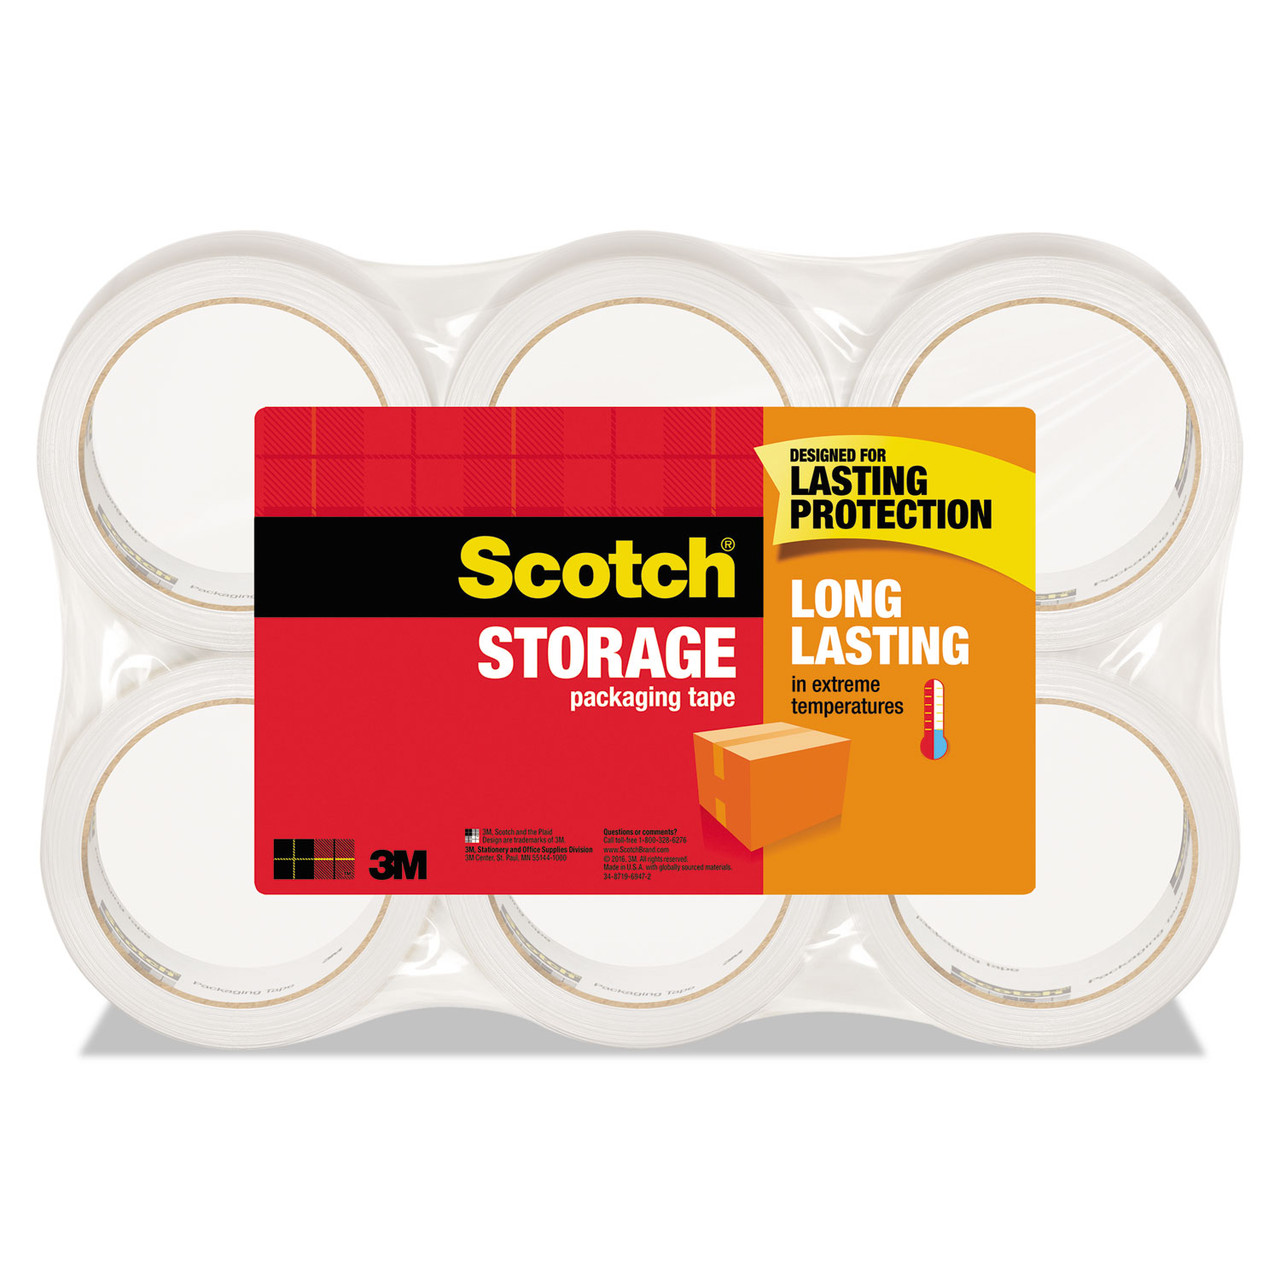 Scotch Easy-Grip Packaging Tape Dispenser Refill, Clear - 6 pack